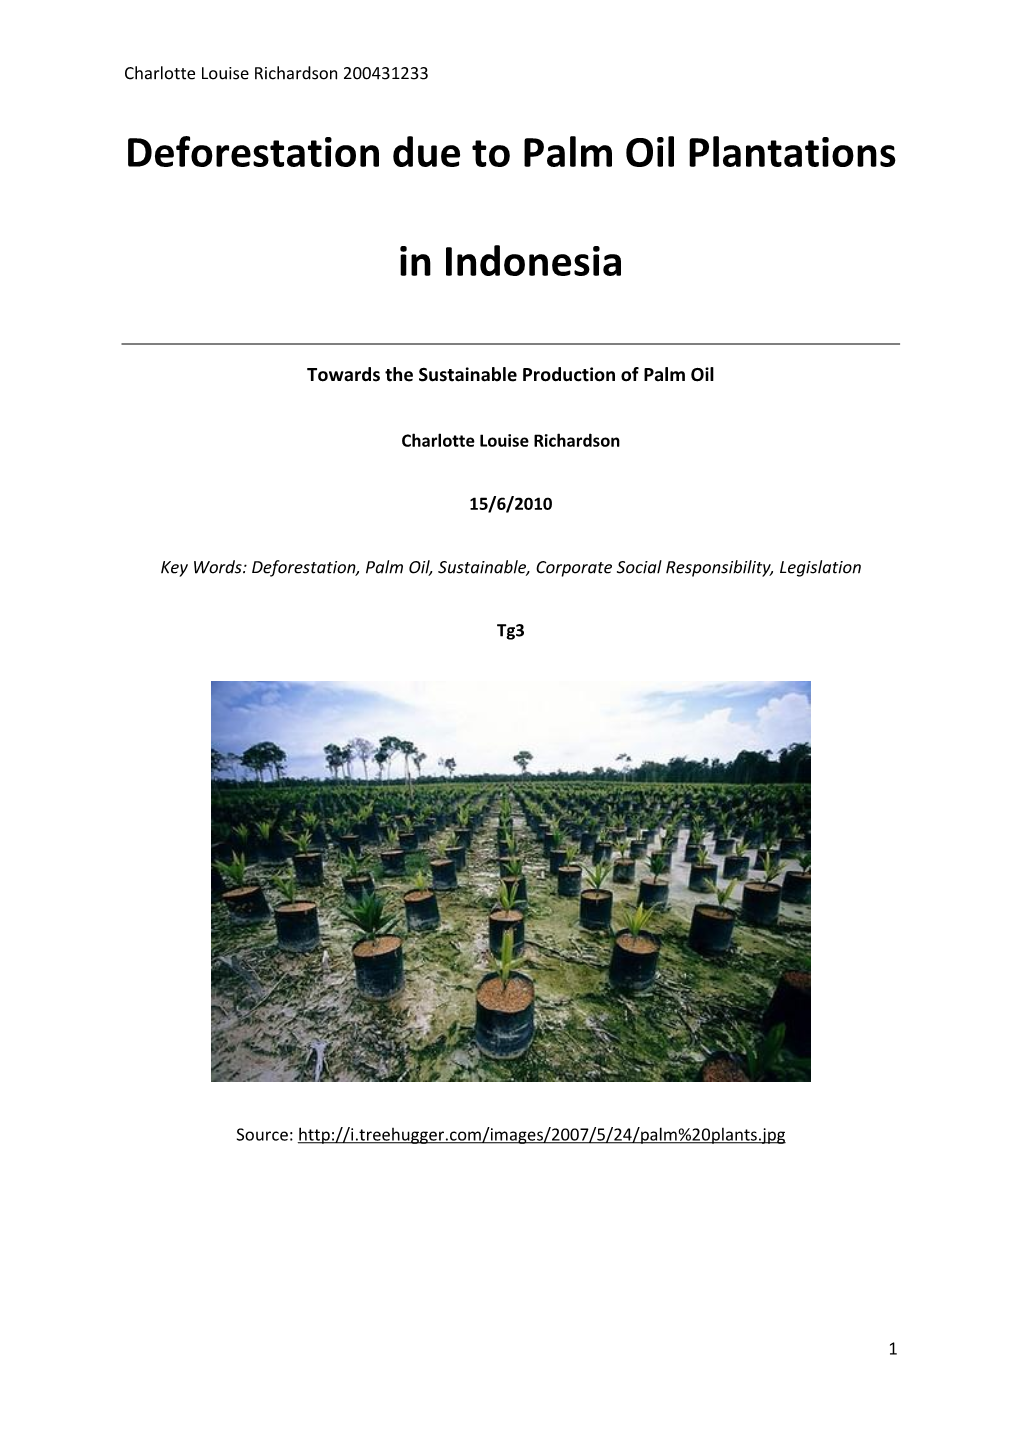 The Palm Oil Research Project